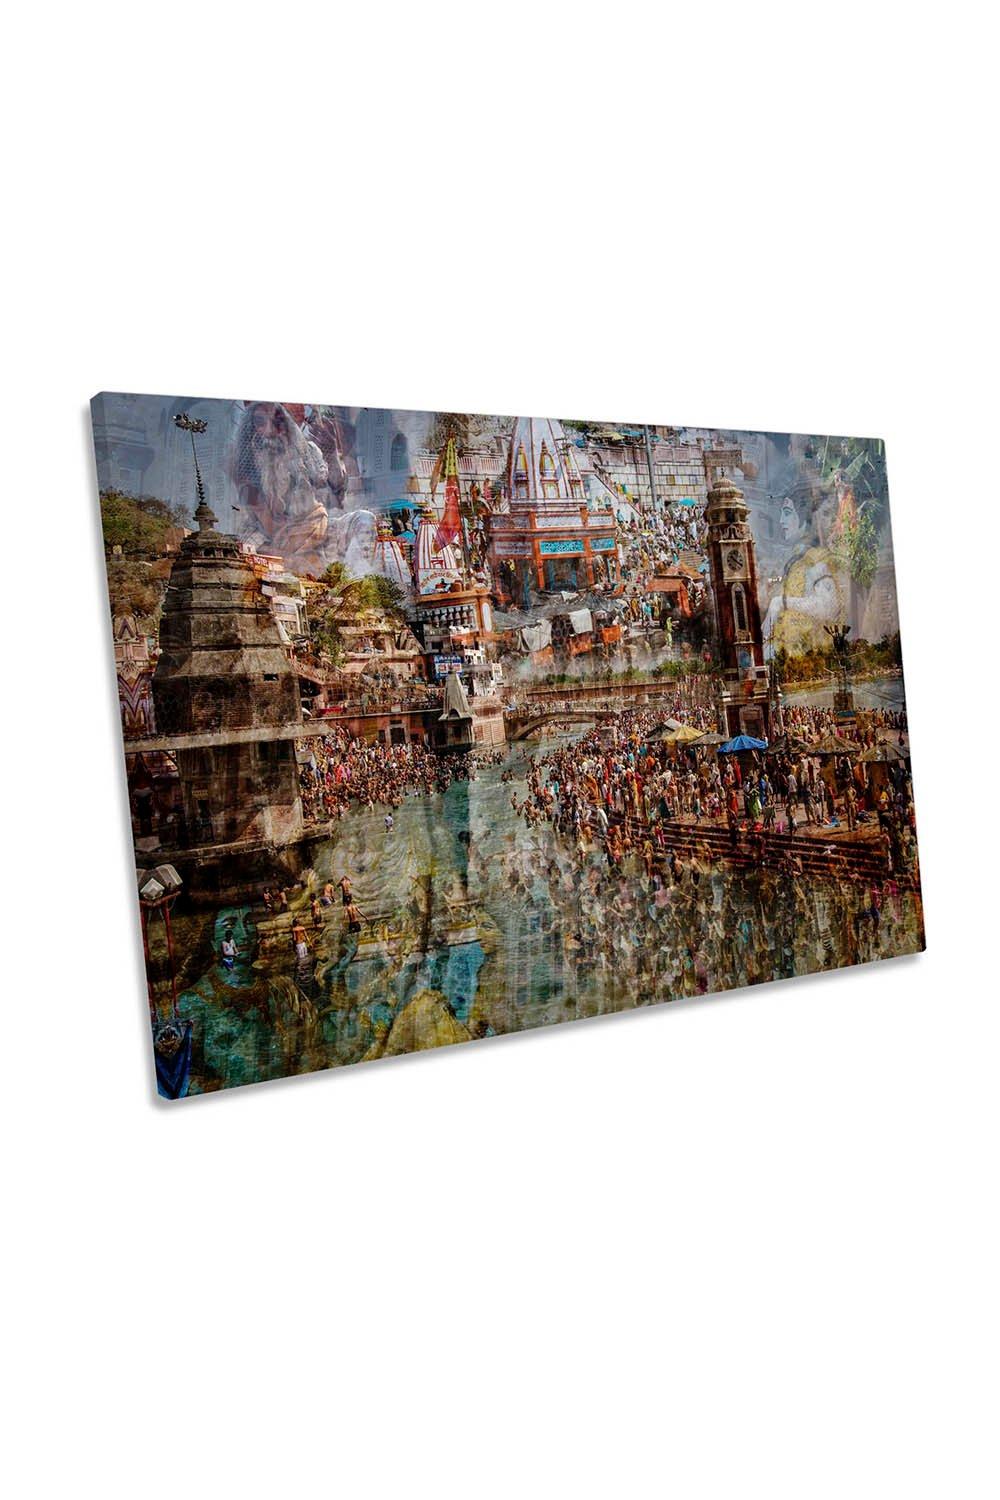 Holy India Abstract Canvas Wall Art Picture Print